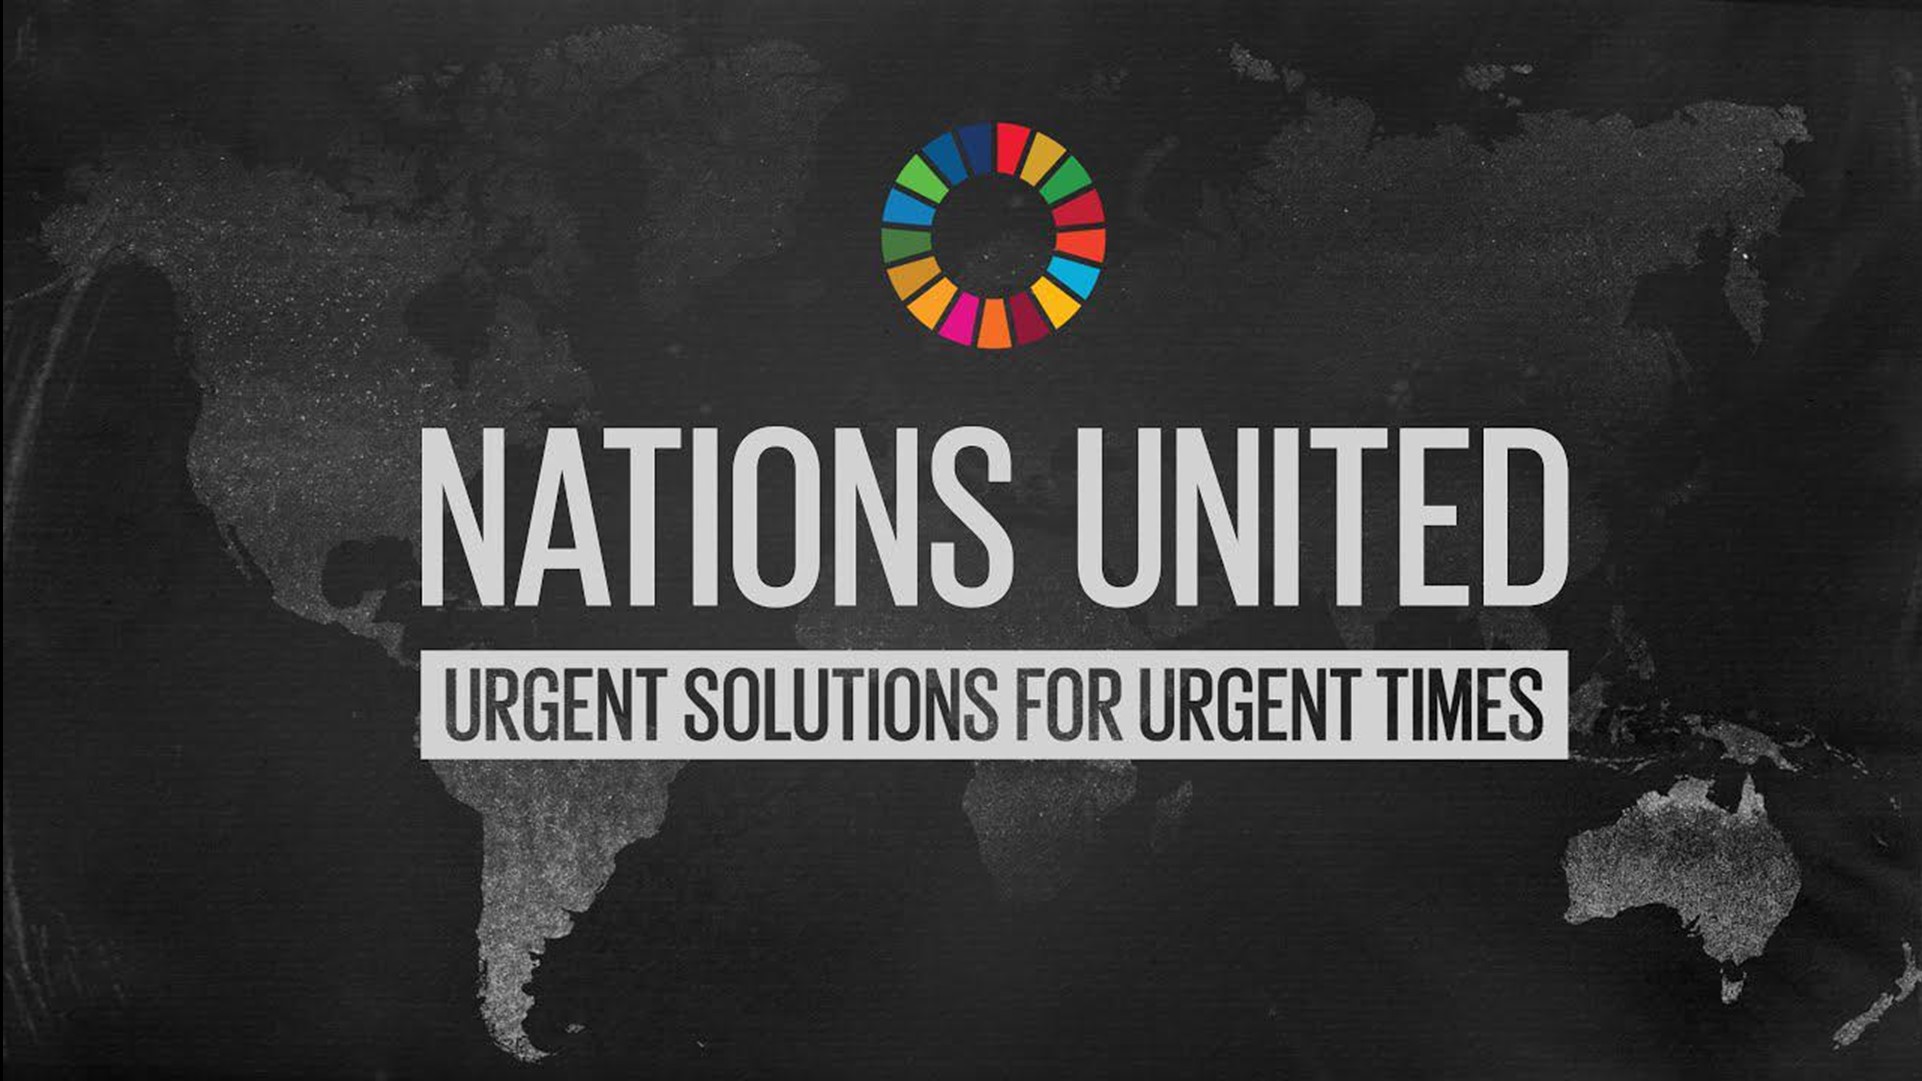 Nations United: Urgent Solutions For Urgent Times